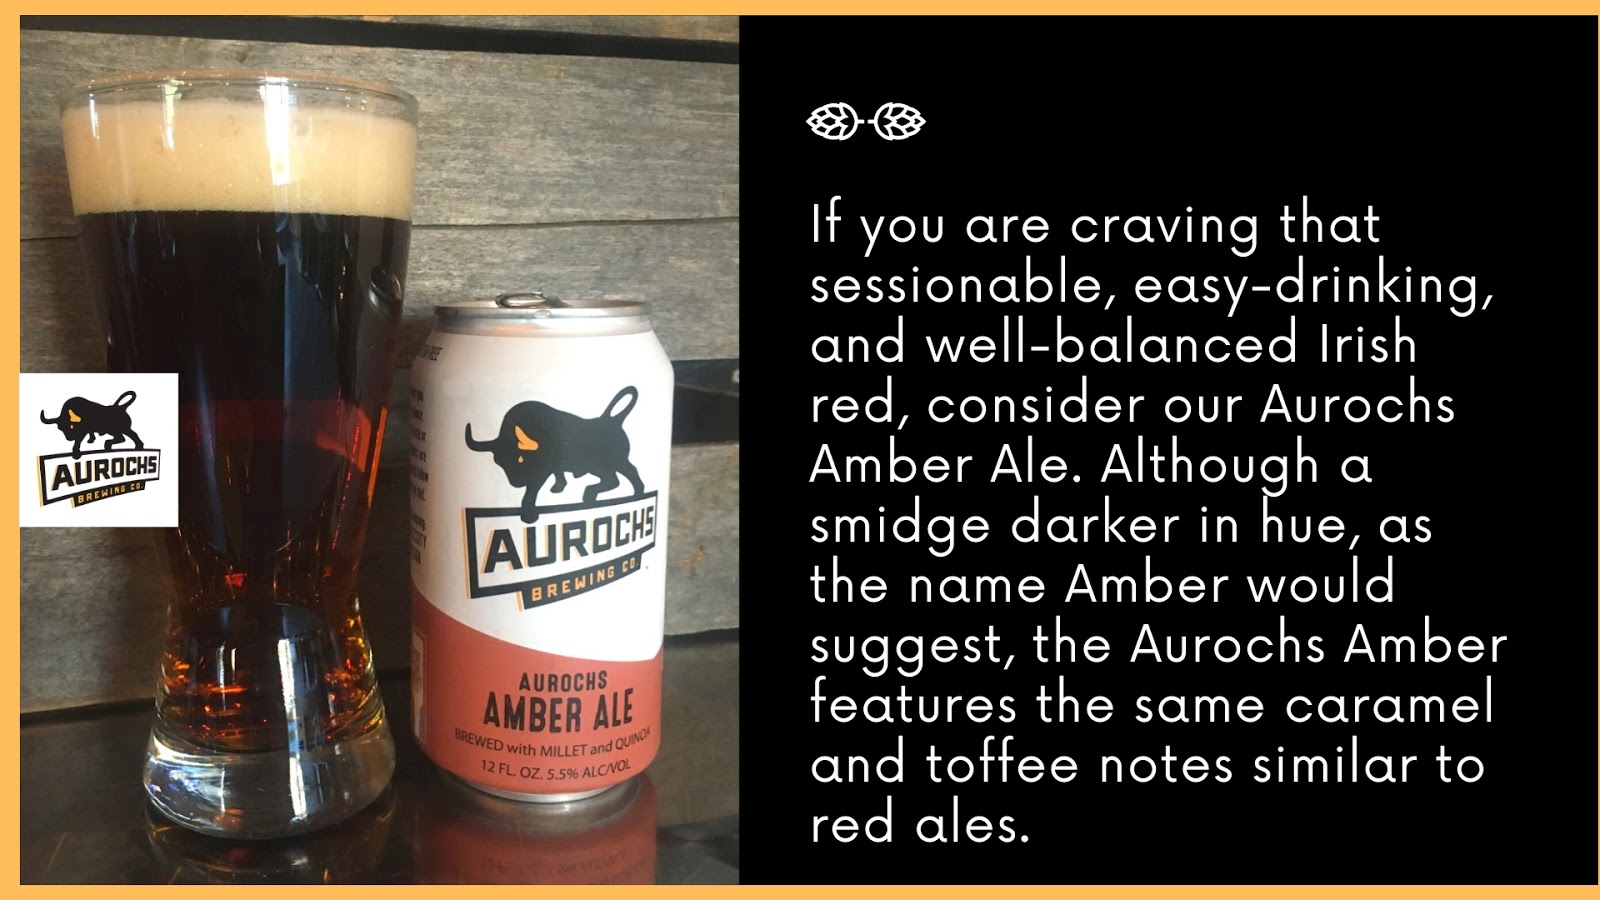 If you are craving that sessionable, easy-drinking, and well-balanced Irish red, consider our Aurochs Amber Ale